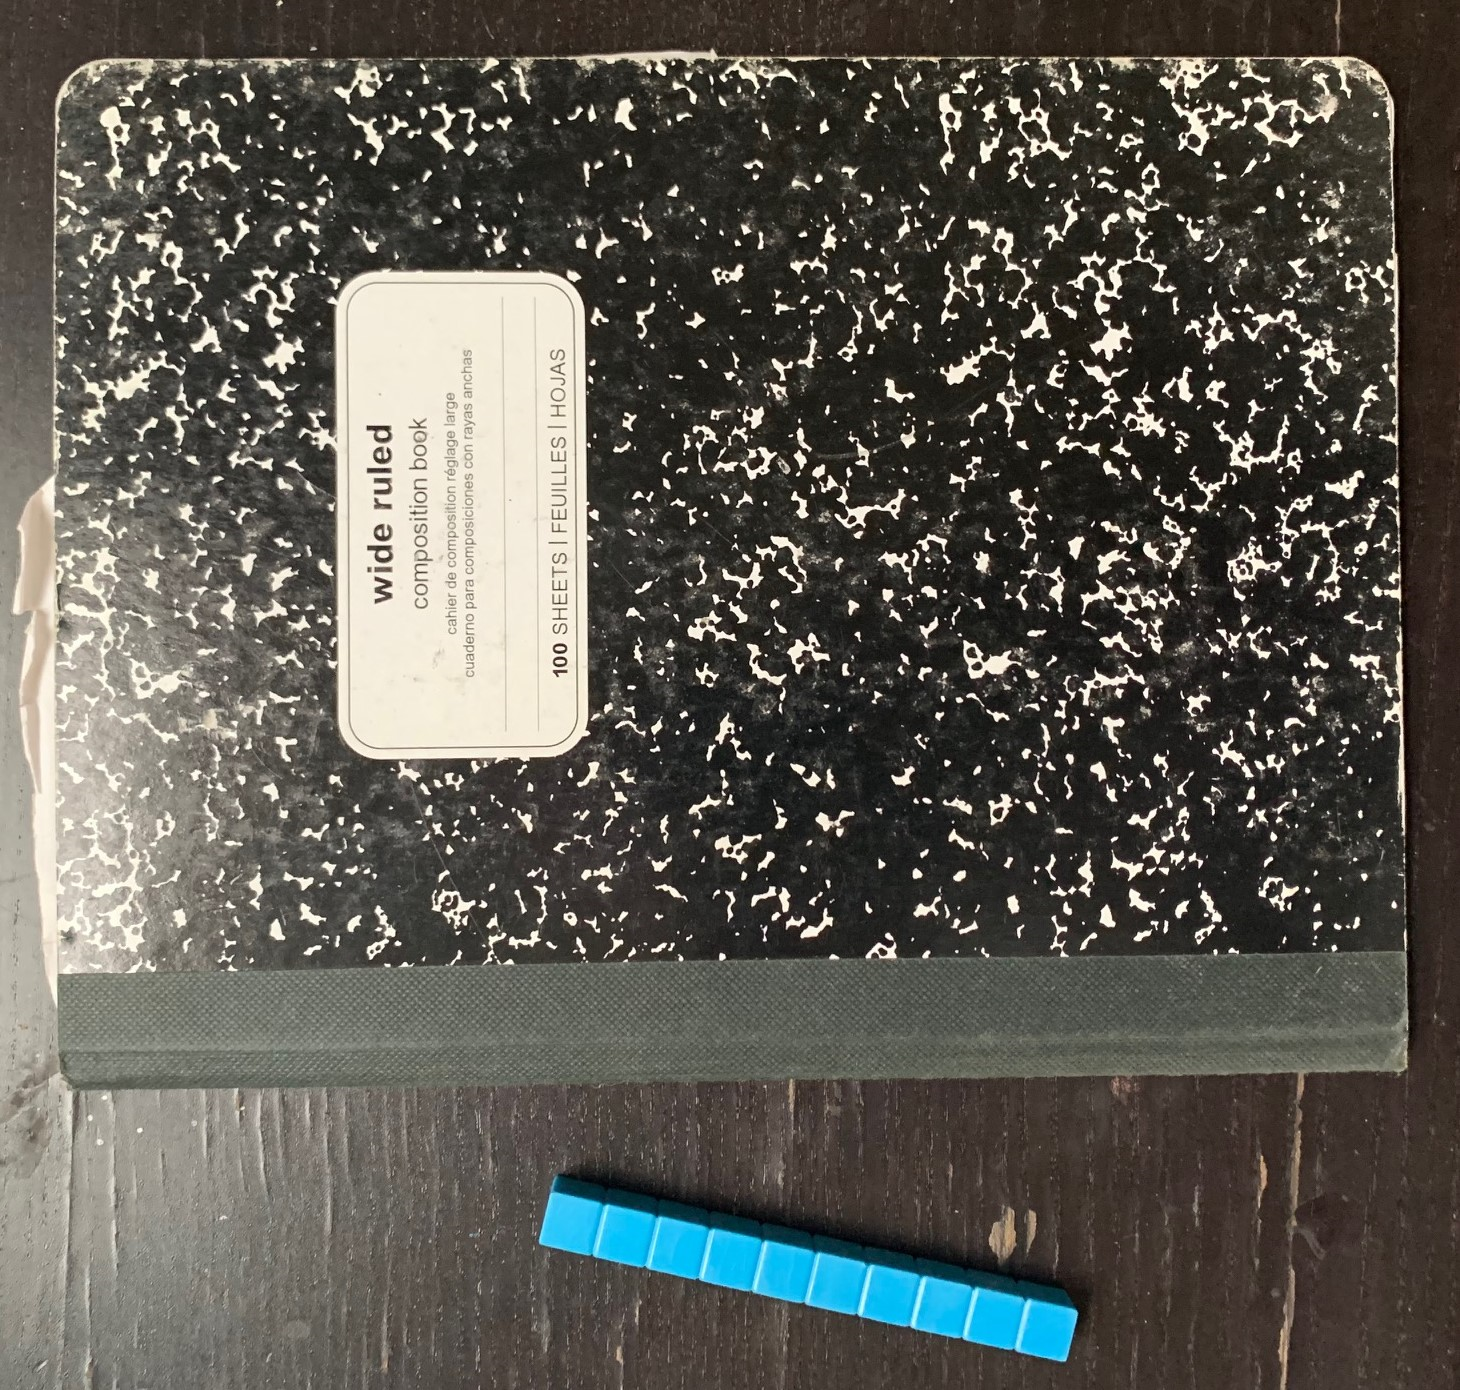 Notebook lying next to a 10-centimeter tool.